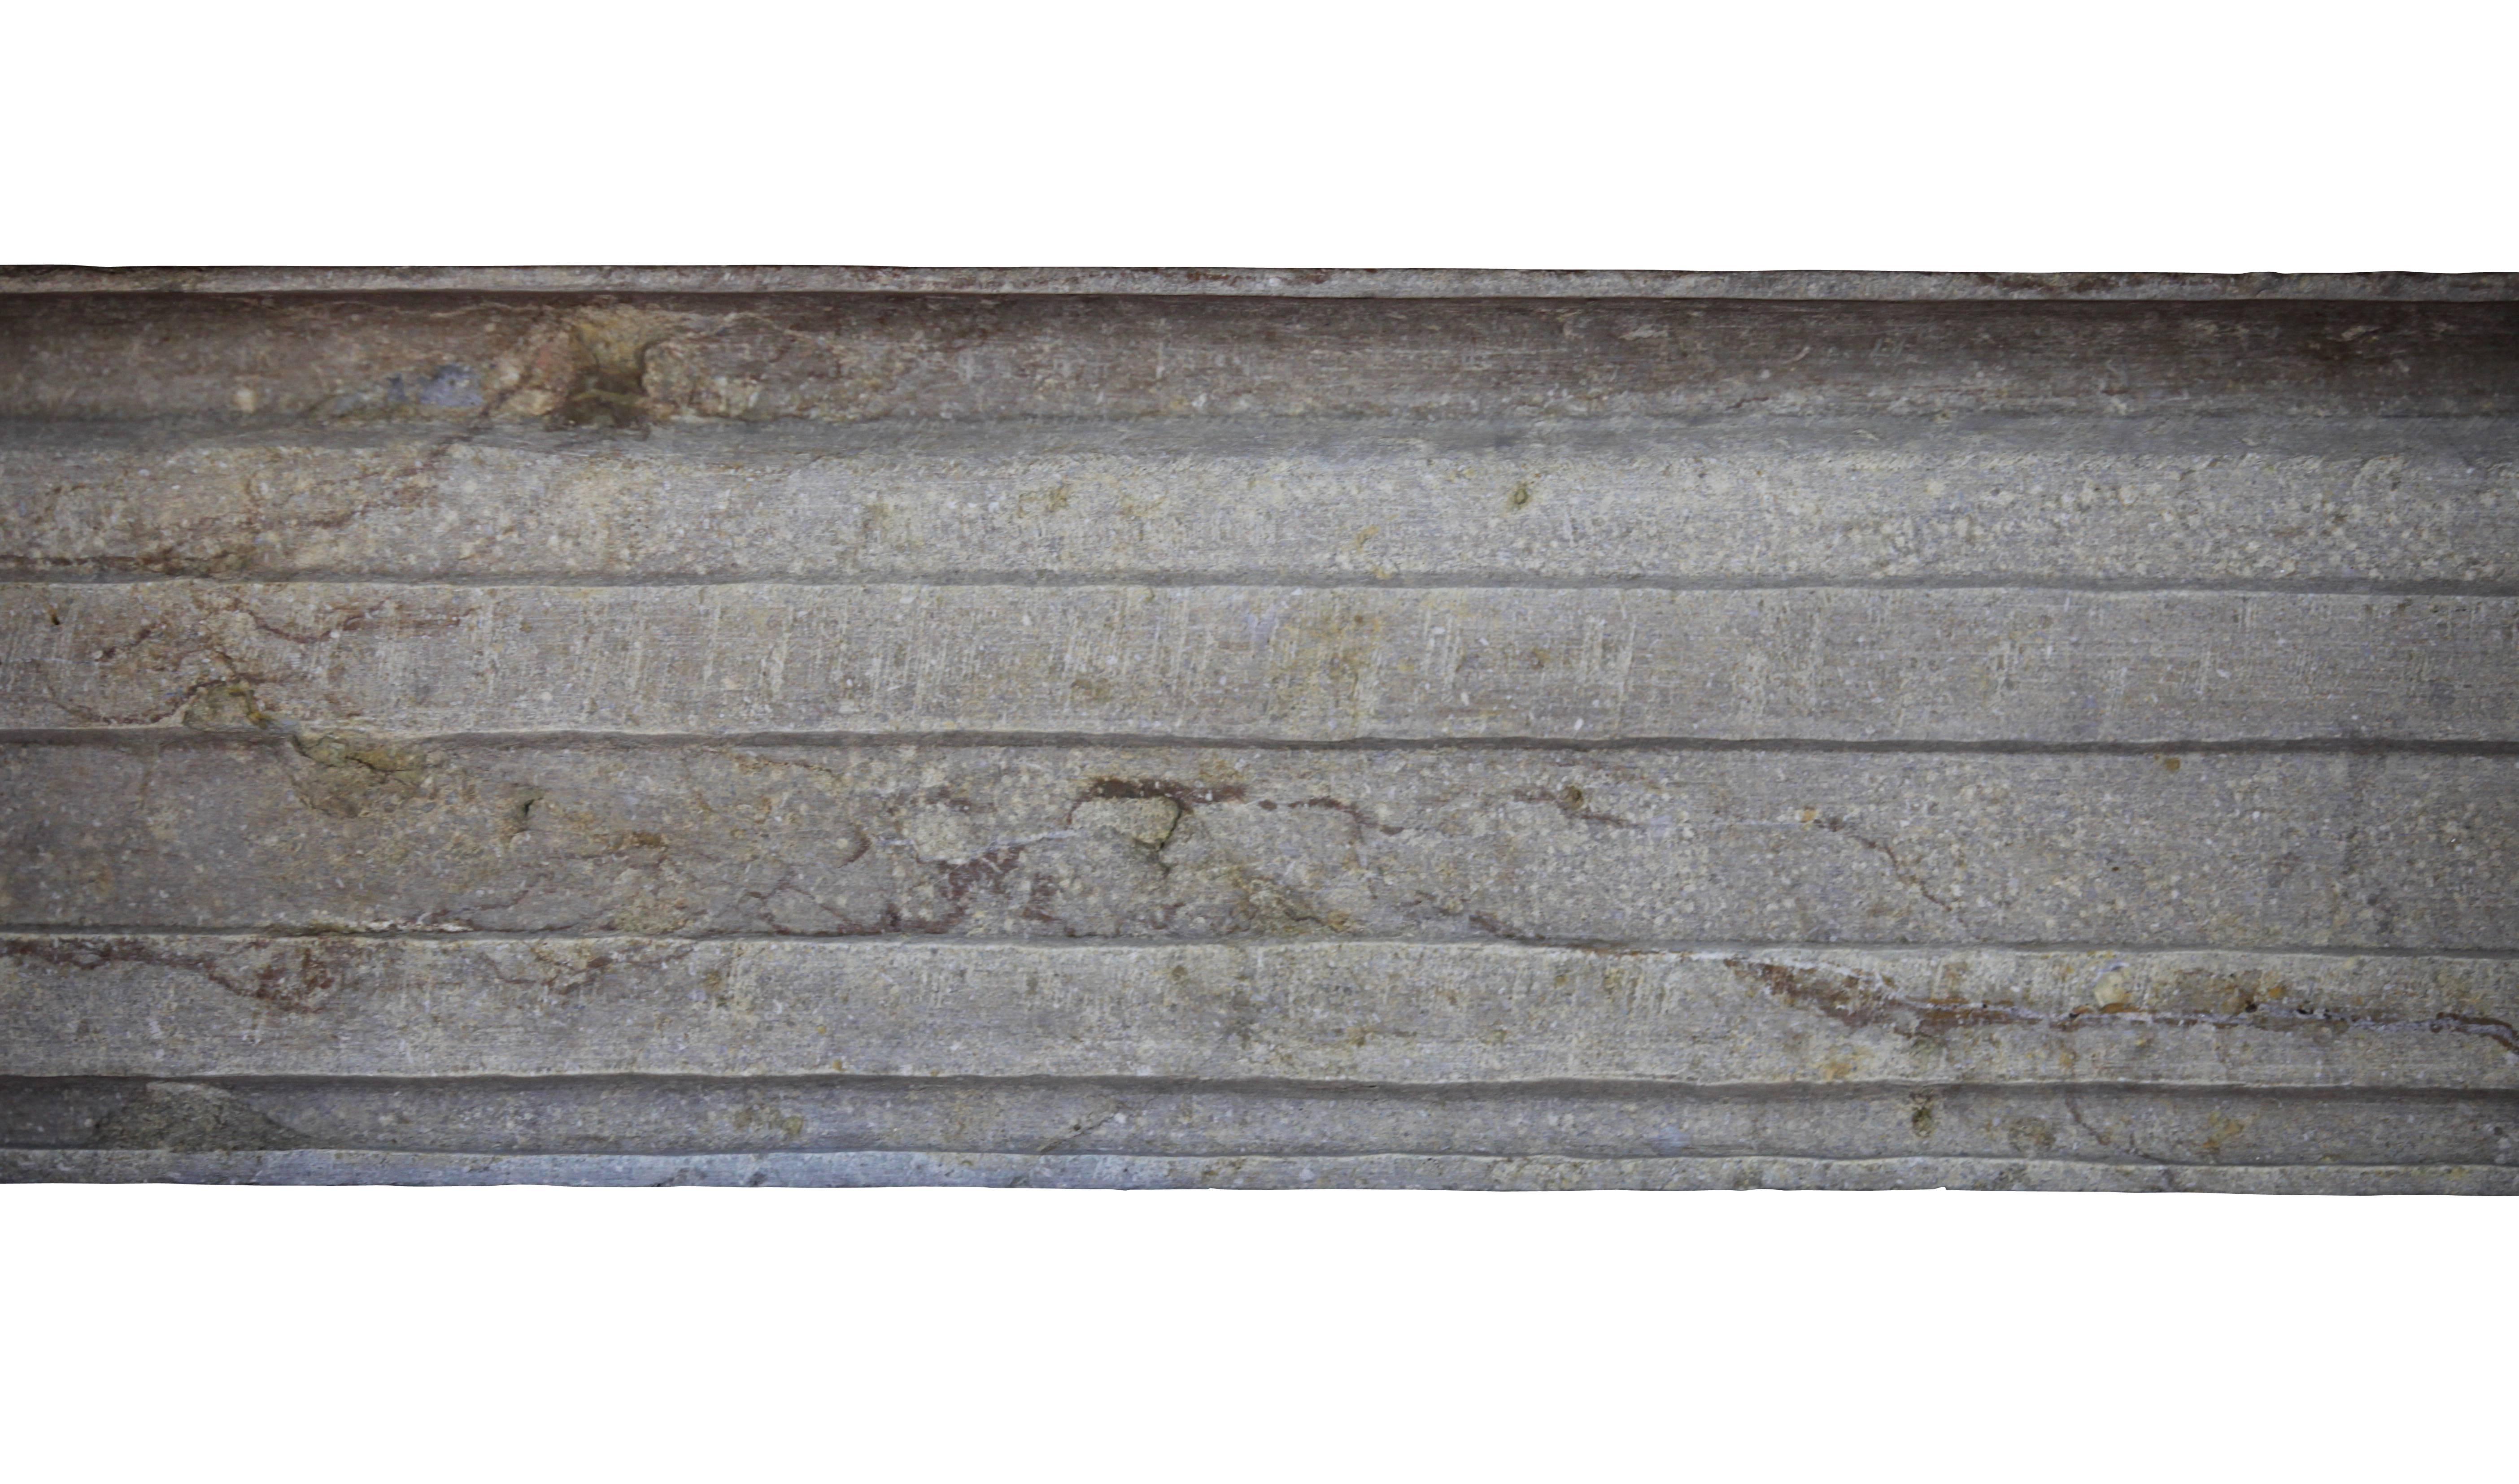 A rustic original bicolor burgundy hard stone fireplace mantel (fireplace) from the Louis XIV period.
Measures:
150 cm EW 59.05